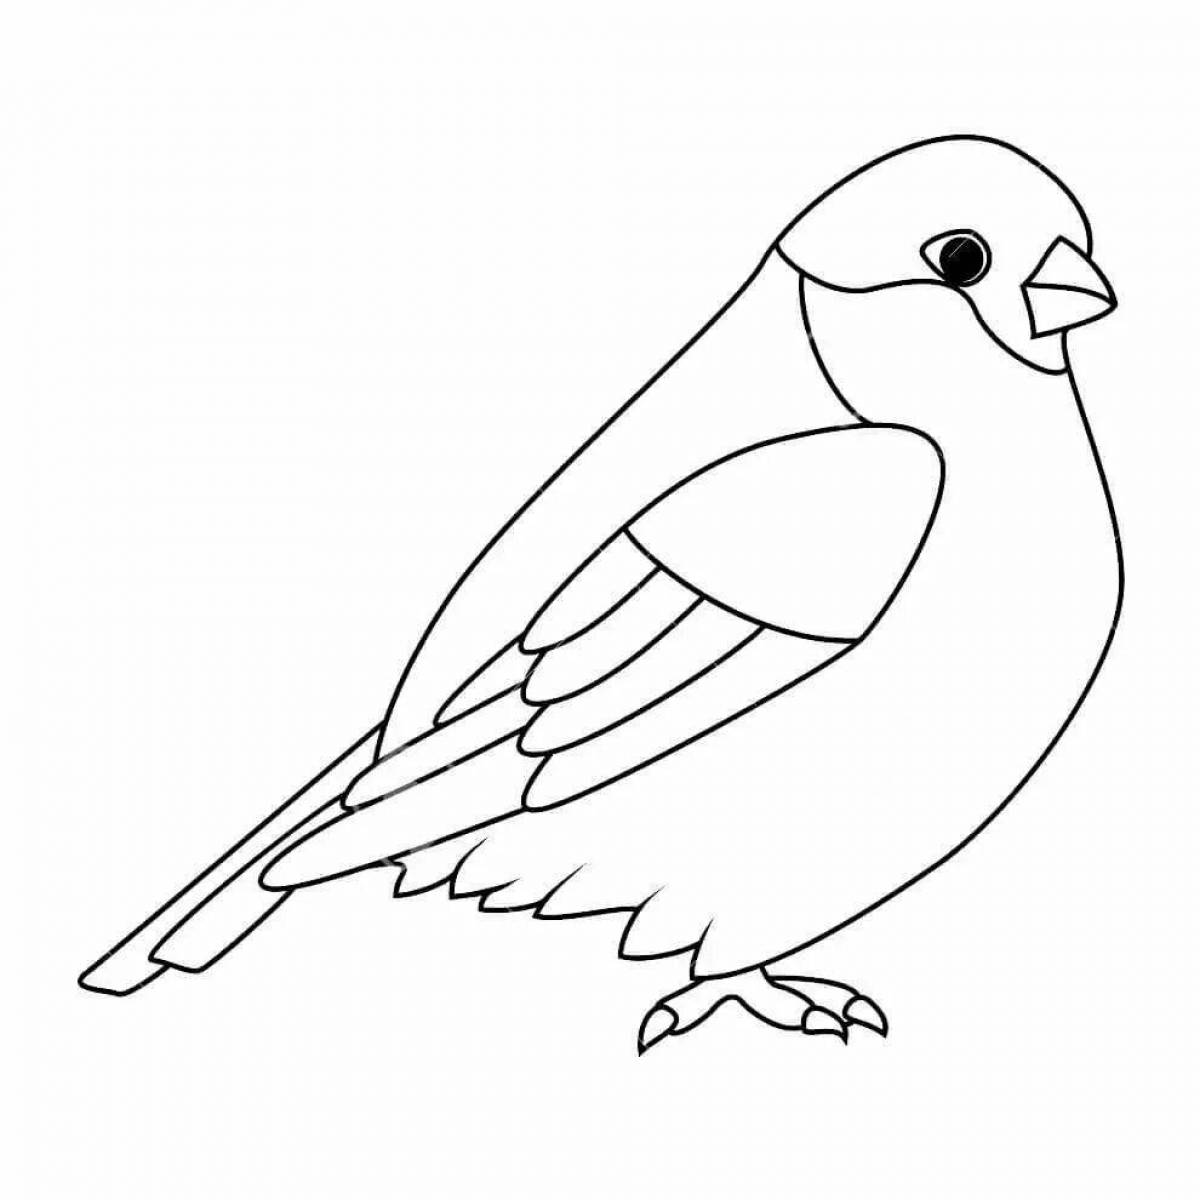 Awesome drawing of a bullfinch for kids